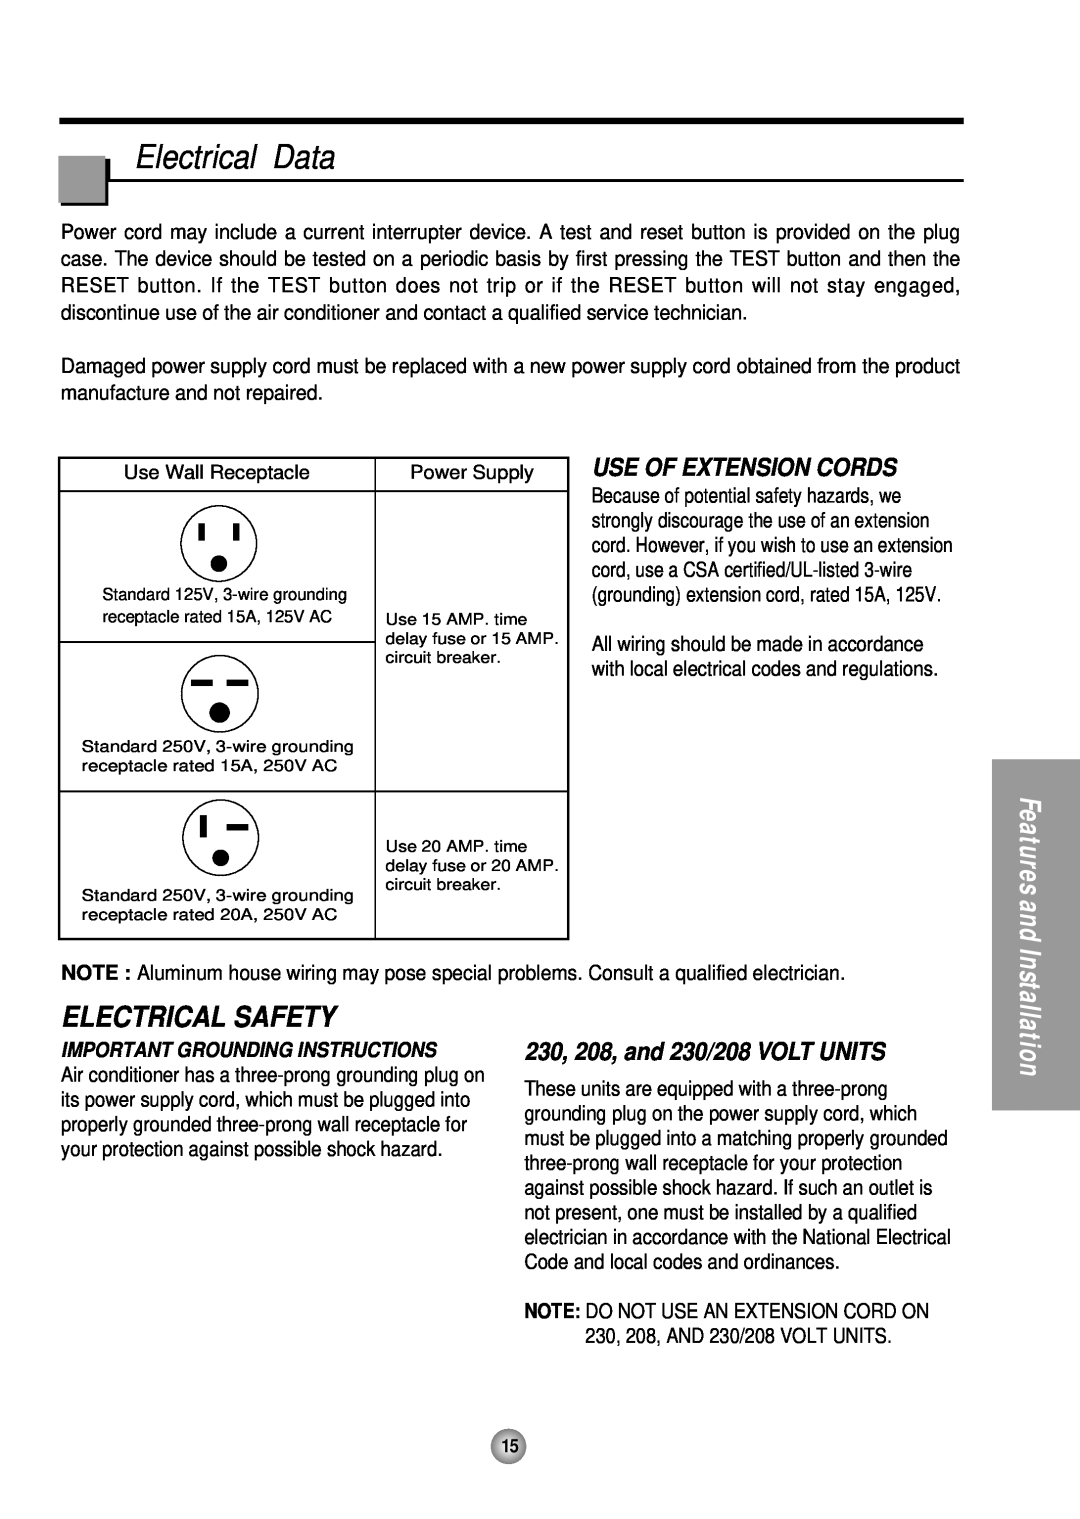 Panasonic CW-XC145HU manual Electrical Data, Use Of Extension Cords, 230, 208, and 230/208 VOLT UNITS, Electrical Safety 